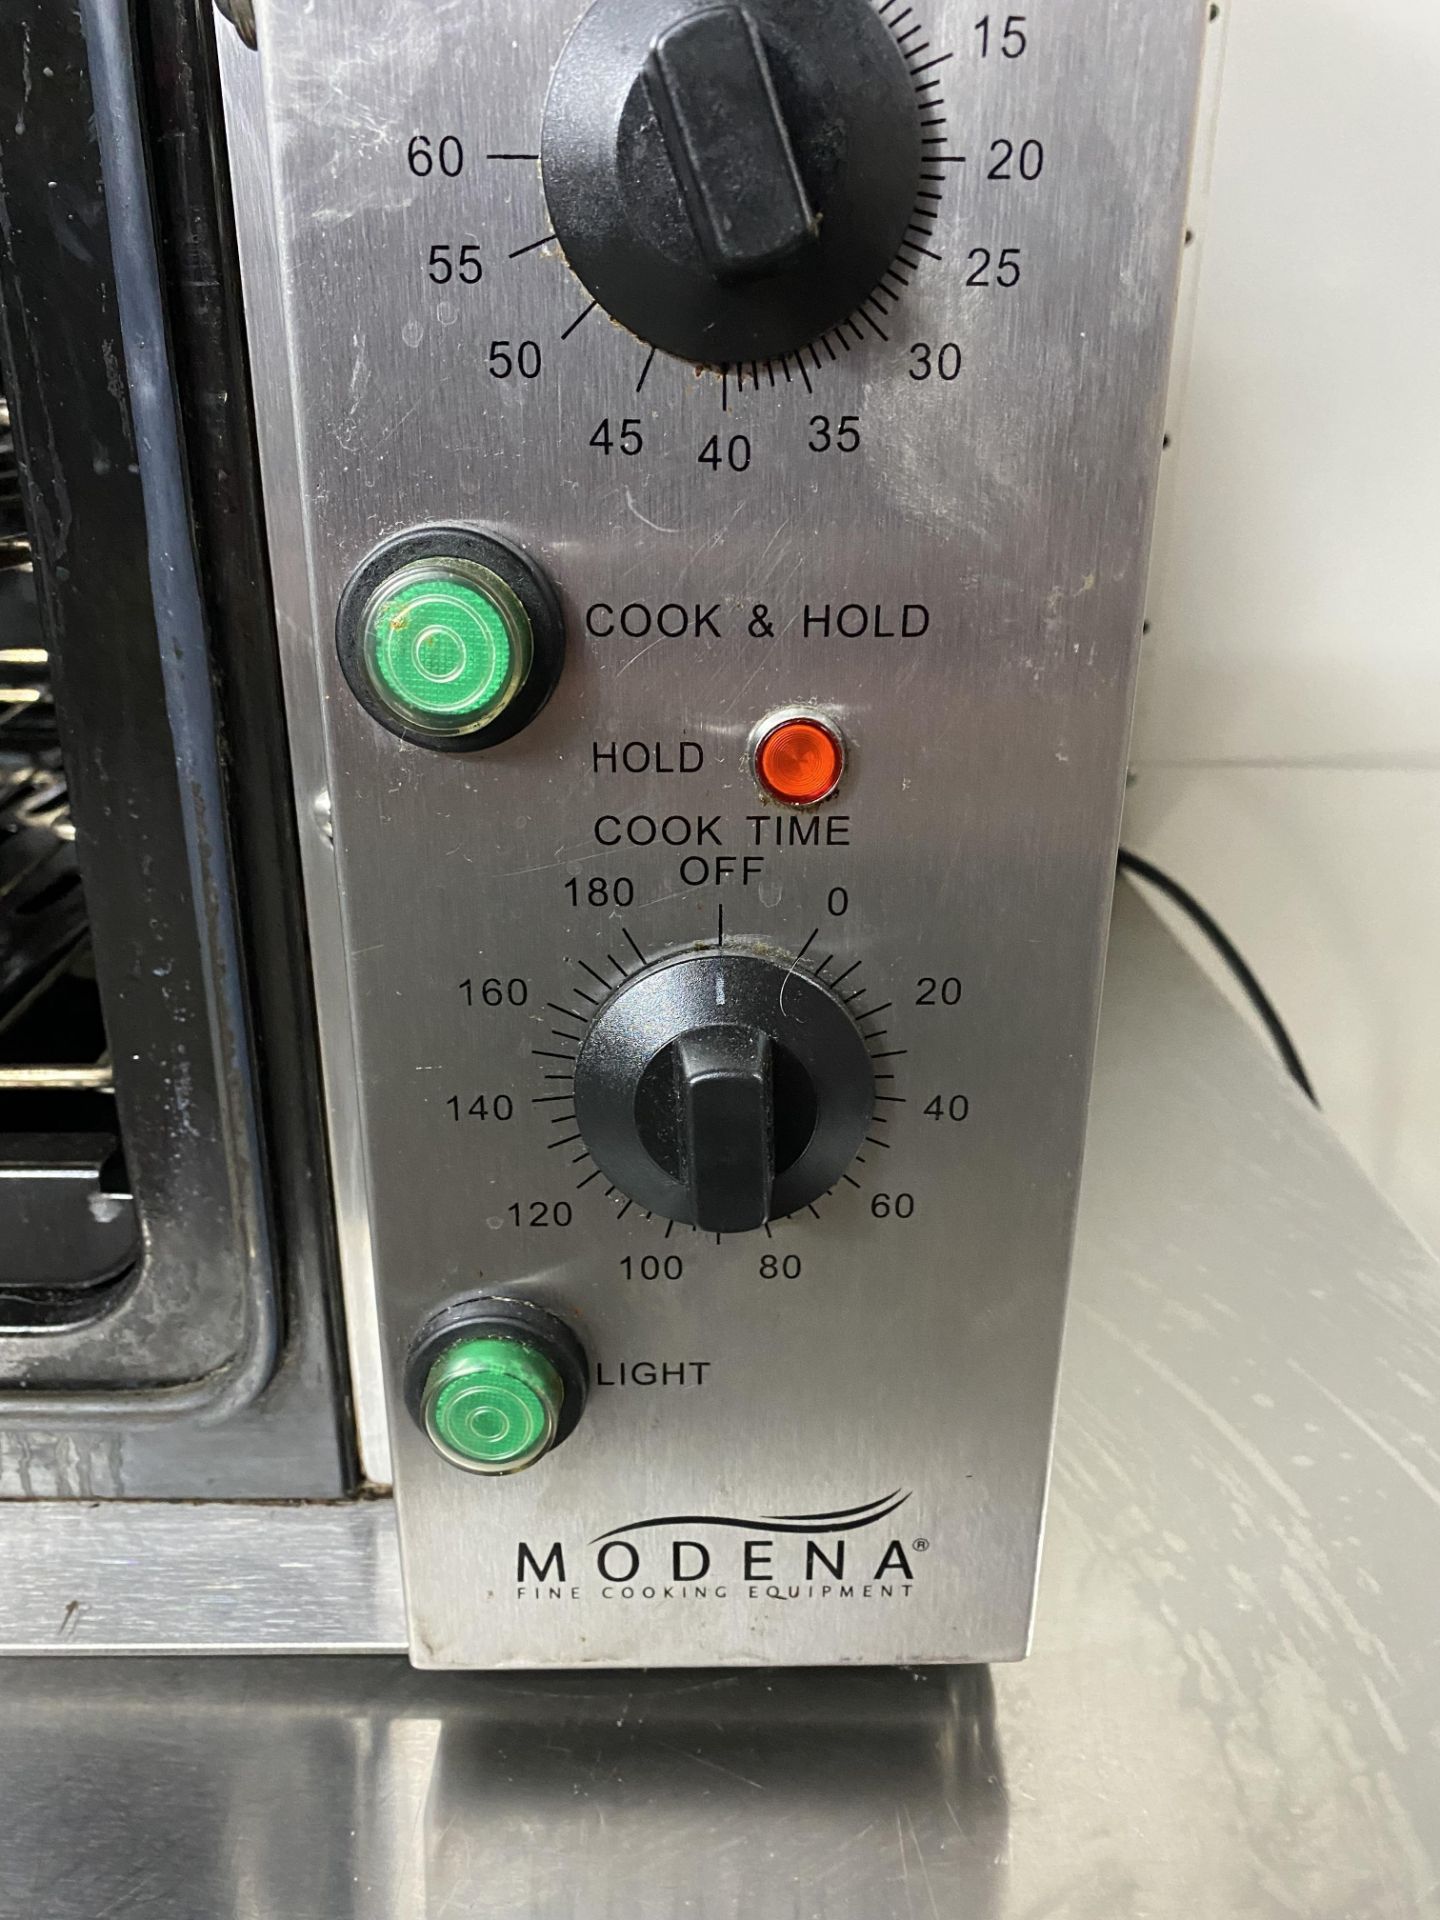 Modena CTC001 Electric Countertop Convection Oven With Grill - Image 7 of 14